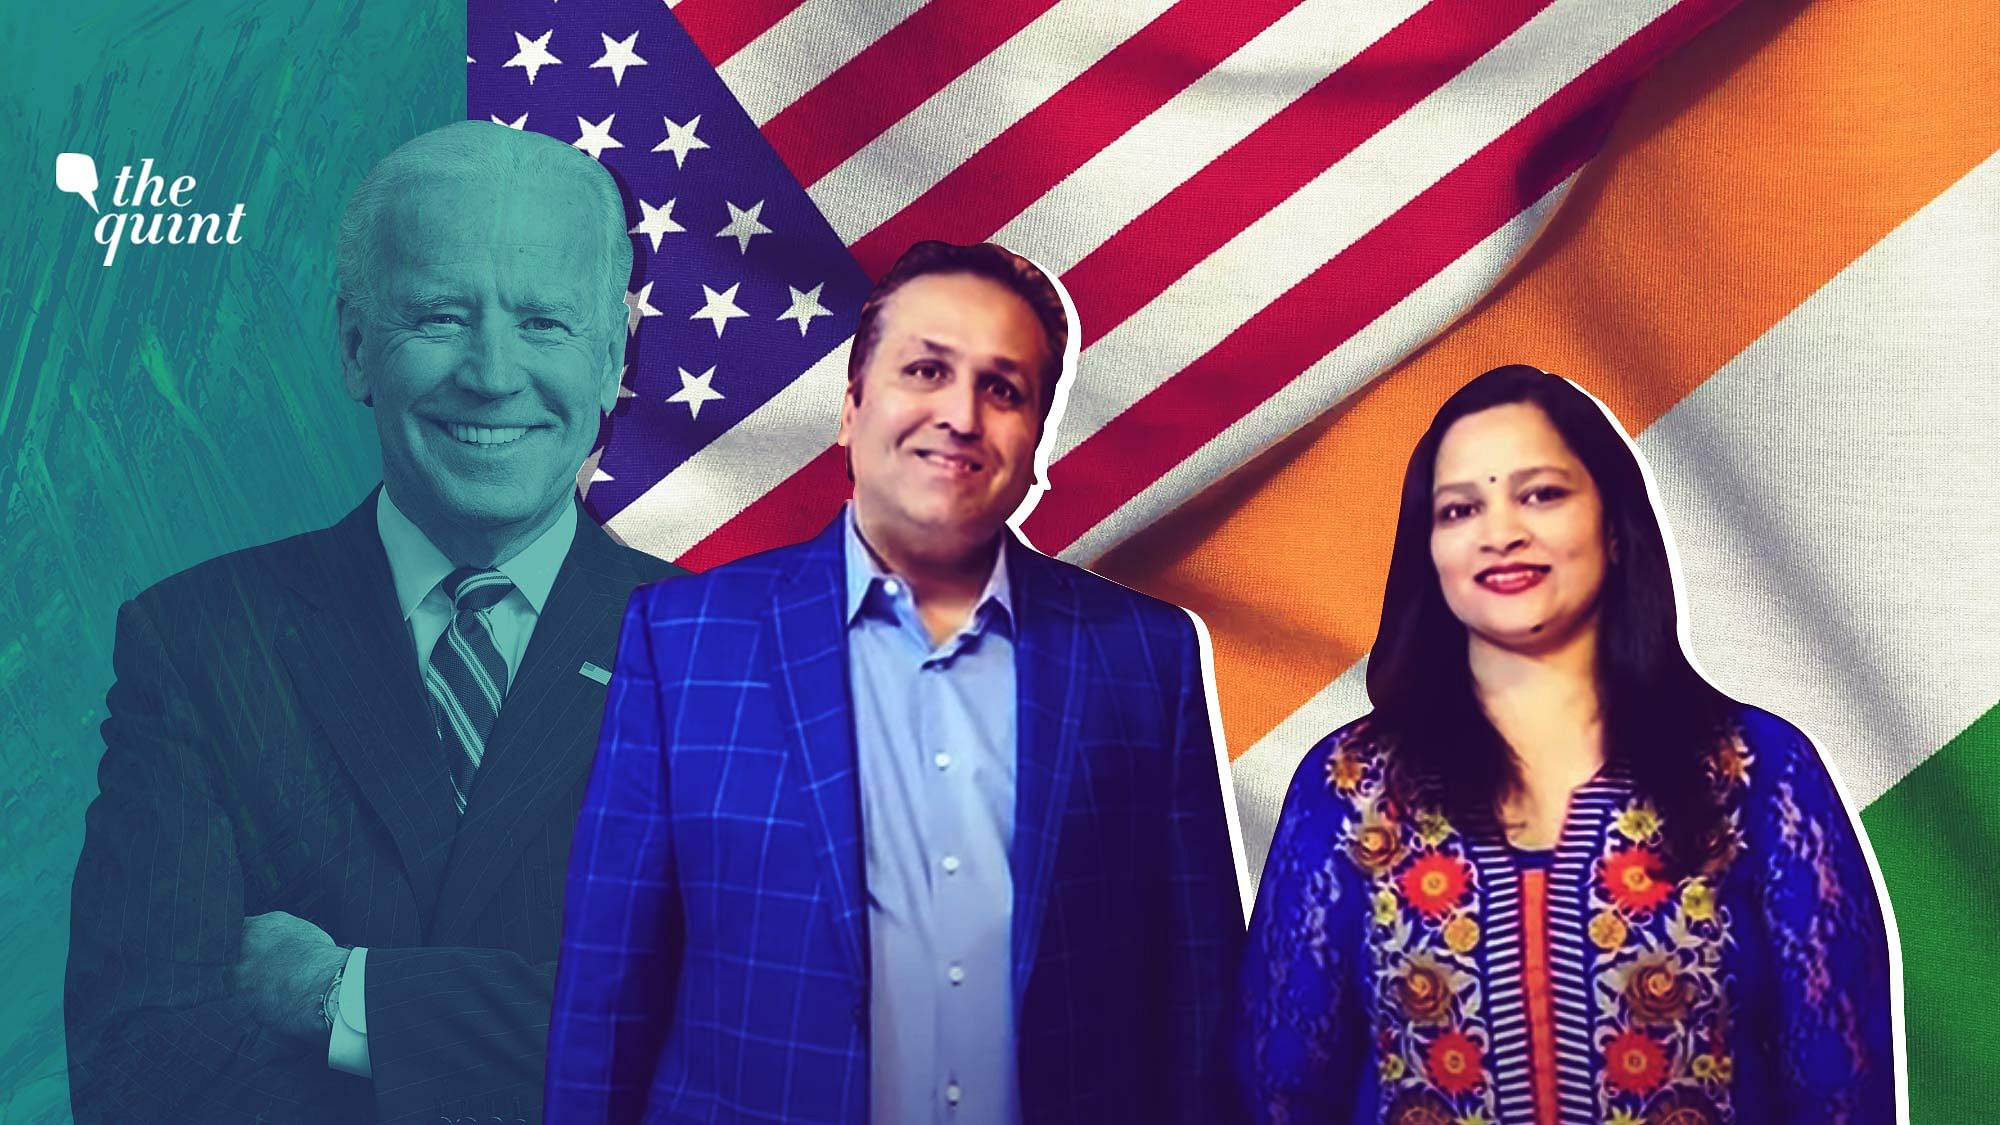 Silicon Valley couple Vinita and Ajay Bhutoria have released two music campaign videos so far in support of Democratic Presidential Candidate Joe Biden.